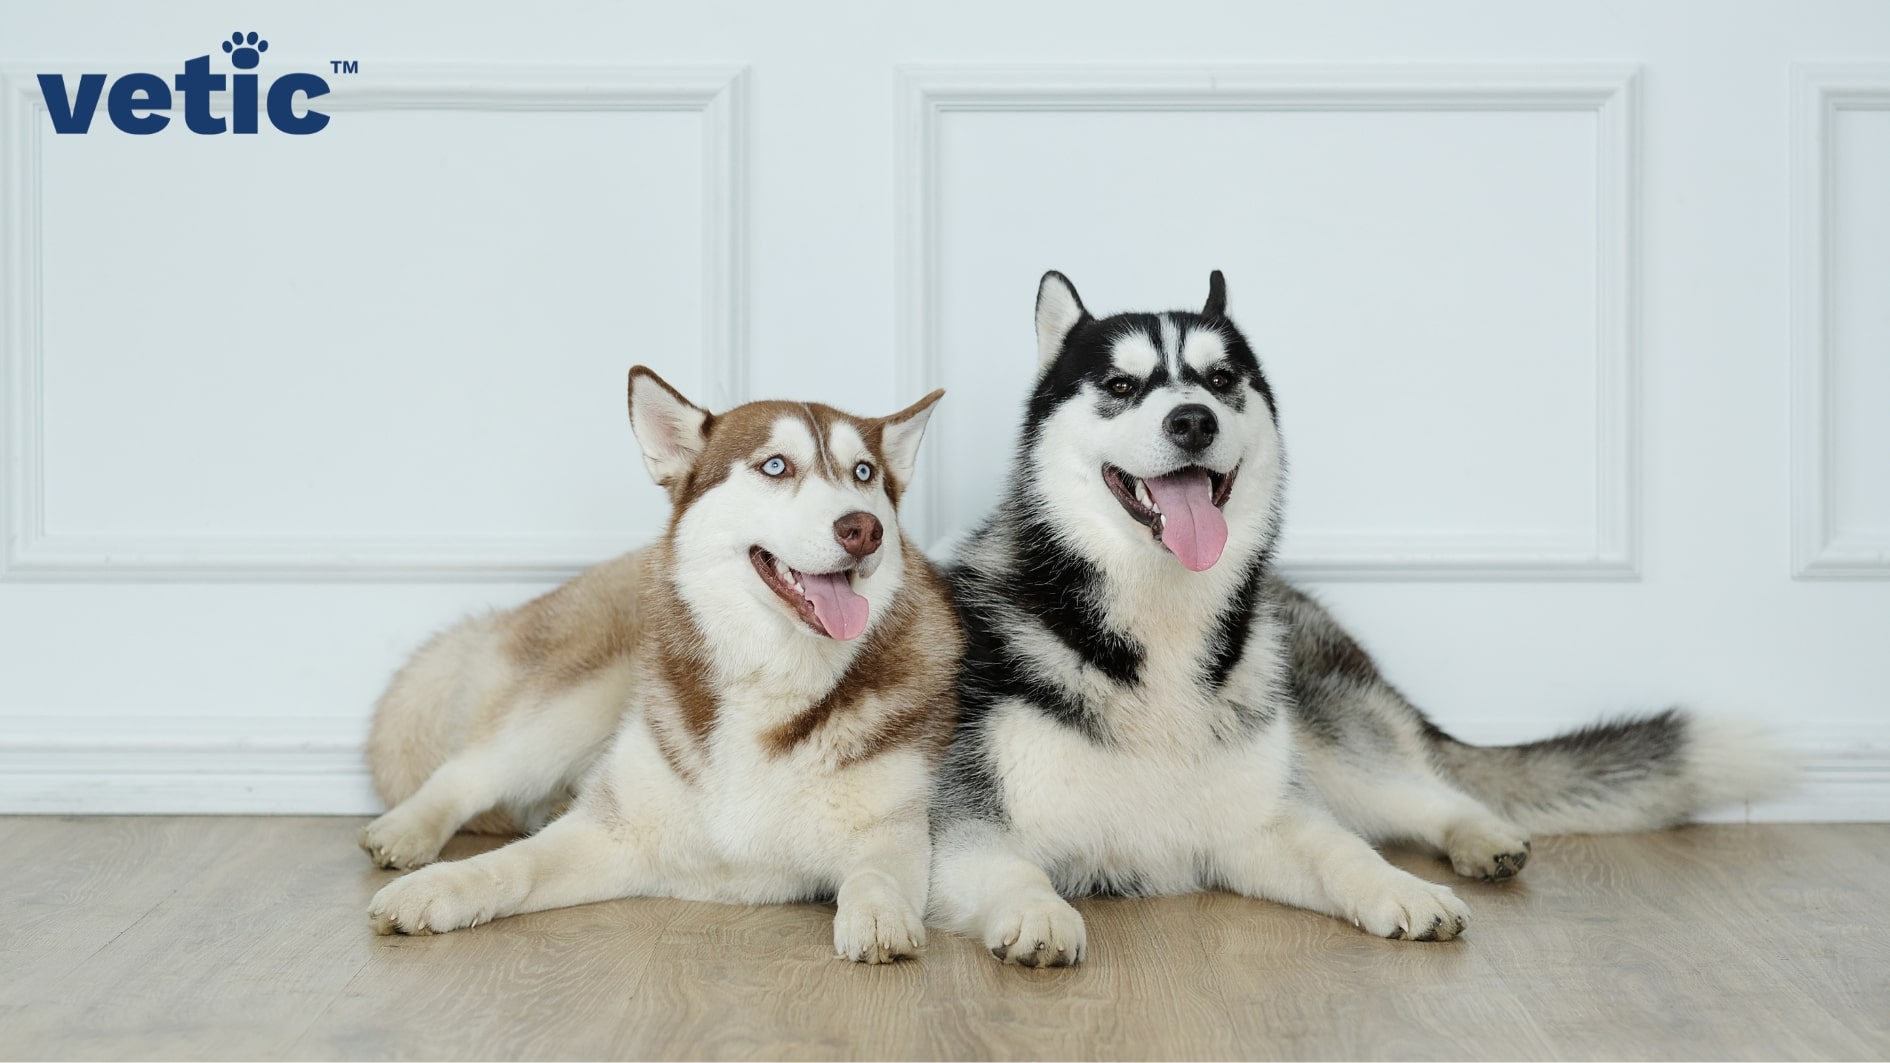 One black and white husky with hazel eyes, and another brown and white husky with blue eyes sitting side by side. Huskies in India are just like their Siberian counterparts. they require socialisation and friends.